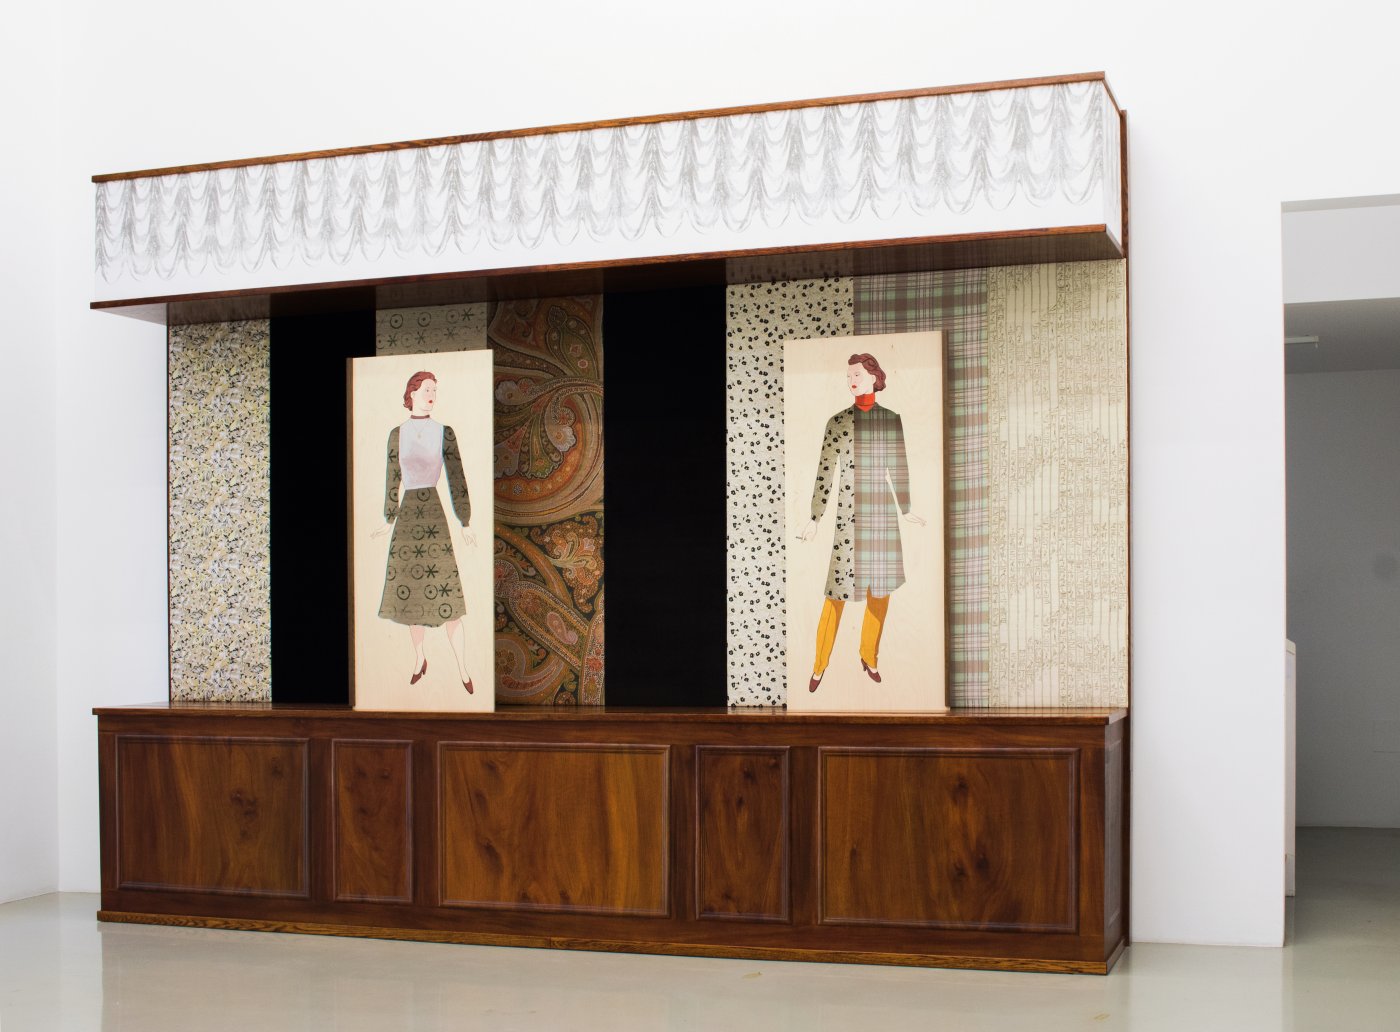 Installation image for Lucy McKenzie & Atelier E.B, at MEYER*KAINER